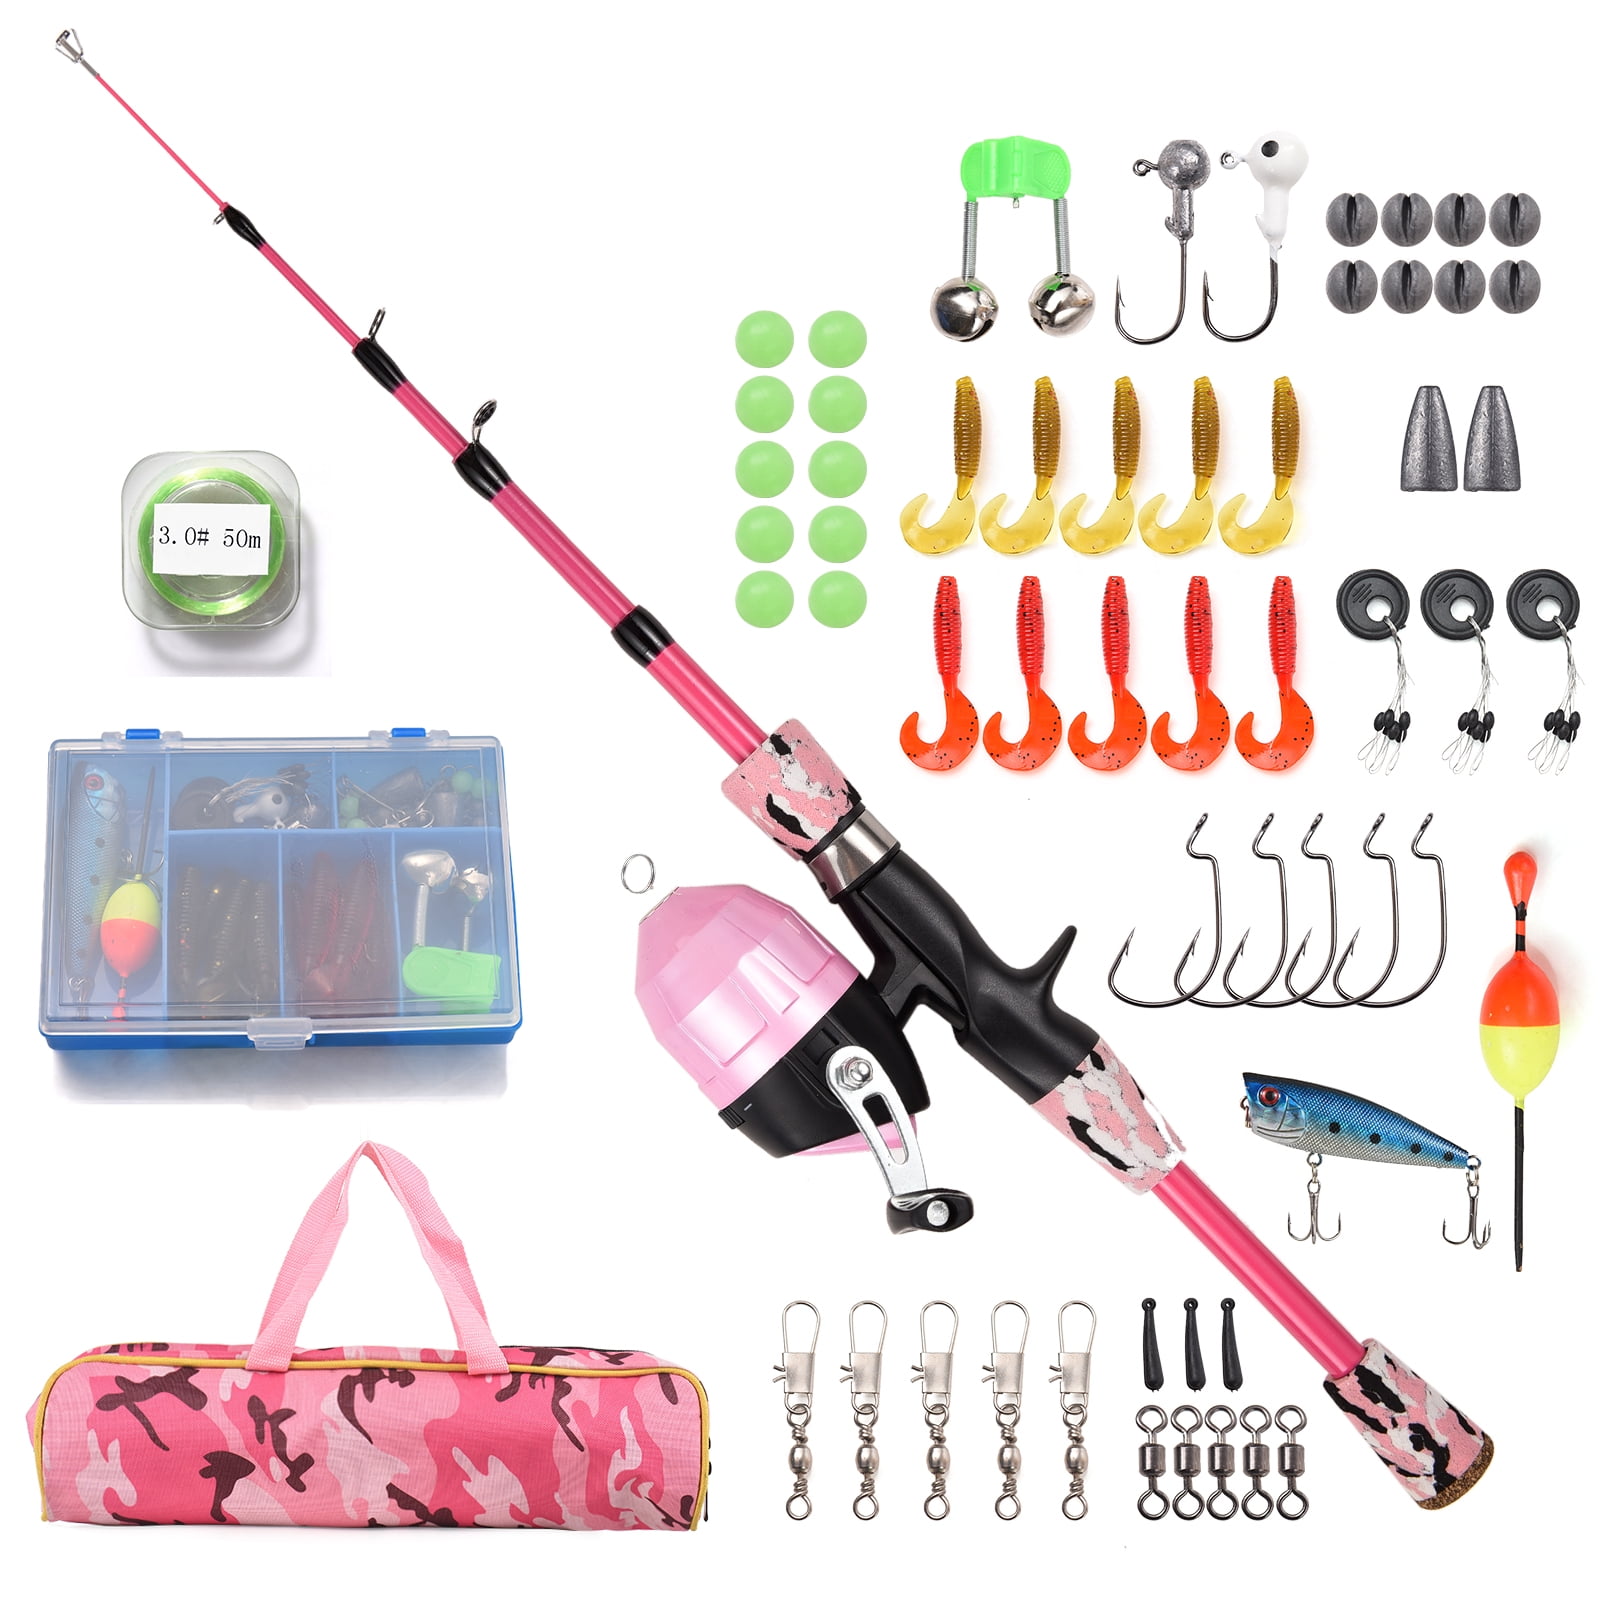 Carevas Fishing Rod and Reel Combo Full Kit 1.2m1.5m Telescopic Casting Rod  Pole with Spincast Reel and Hooks Lures Swivels Carry Bag